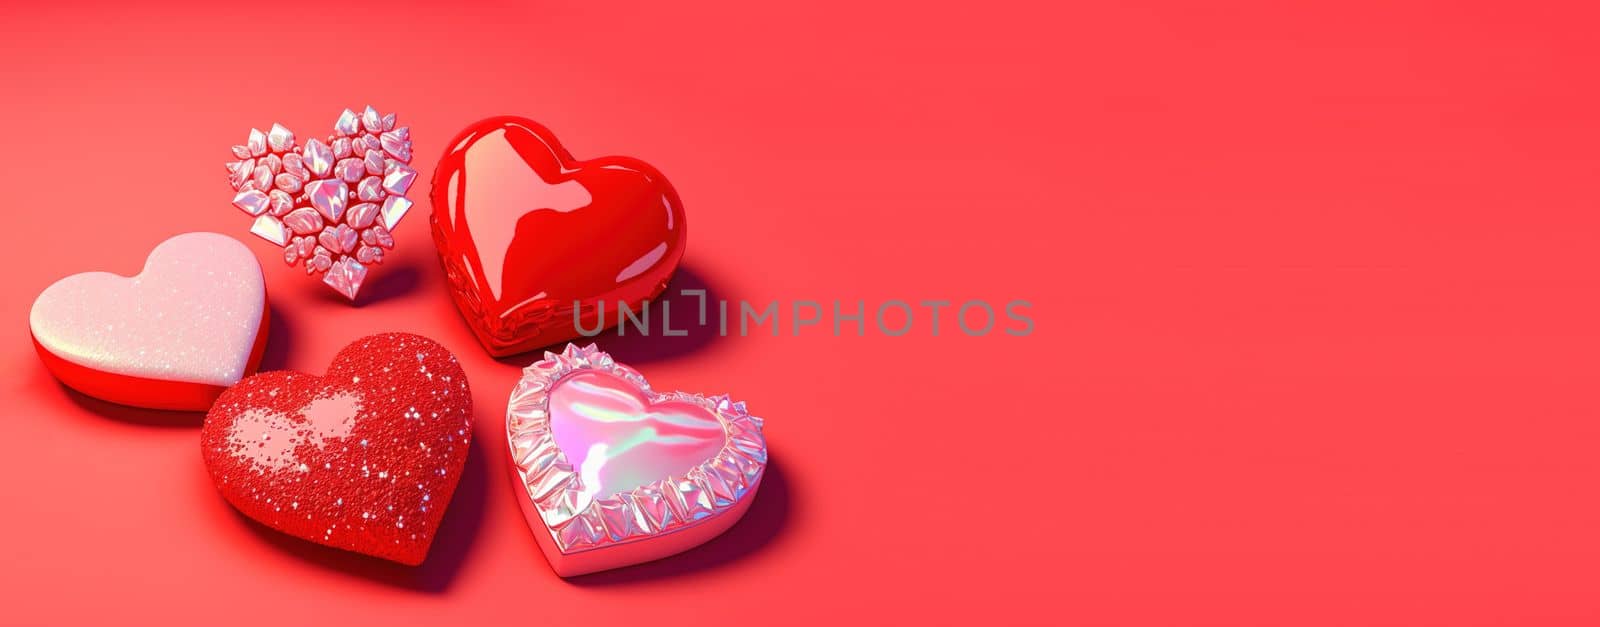 Valentine's Day Crystal Diamond Heart 3D Illustration for Banner and Background